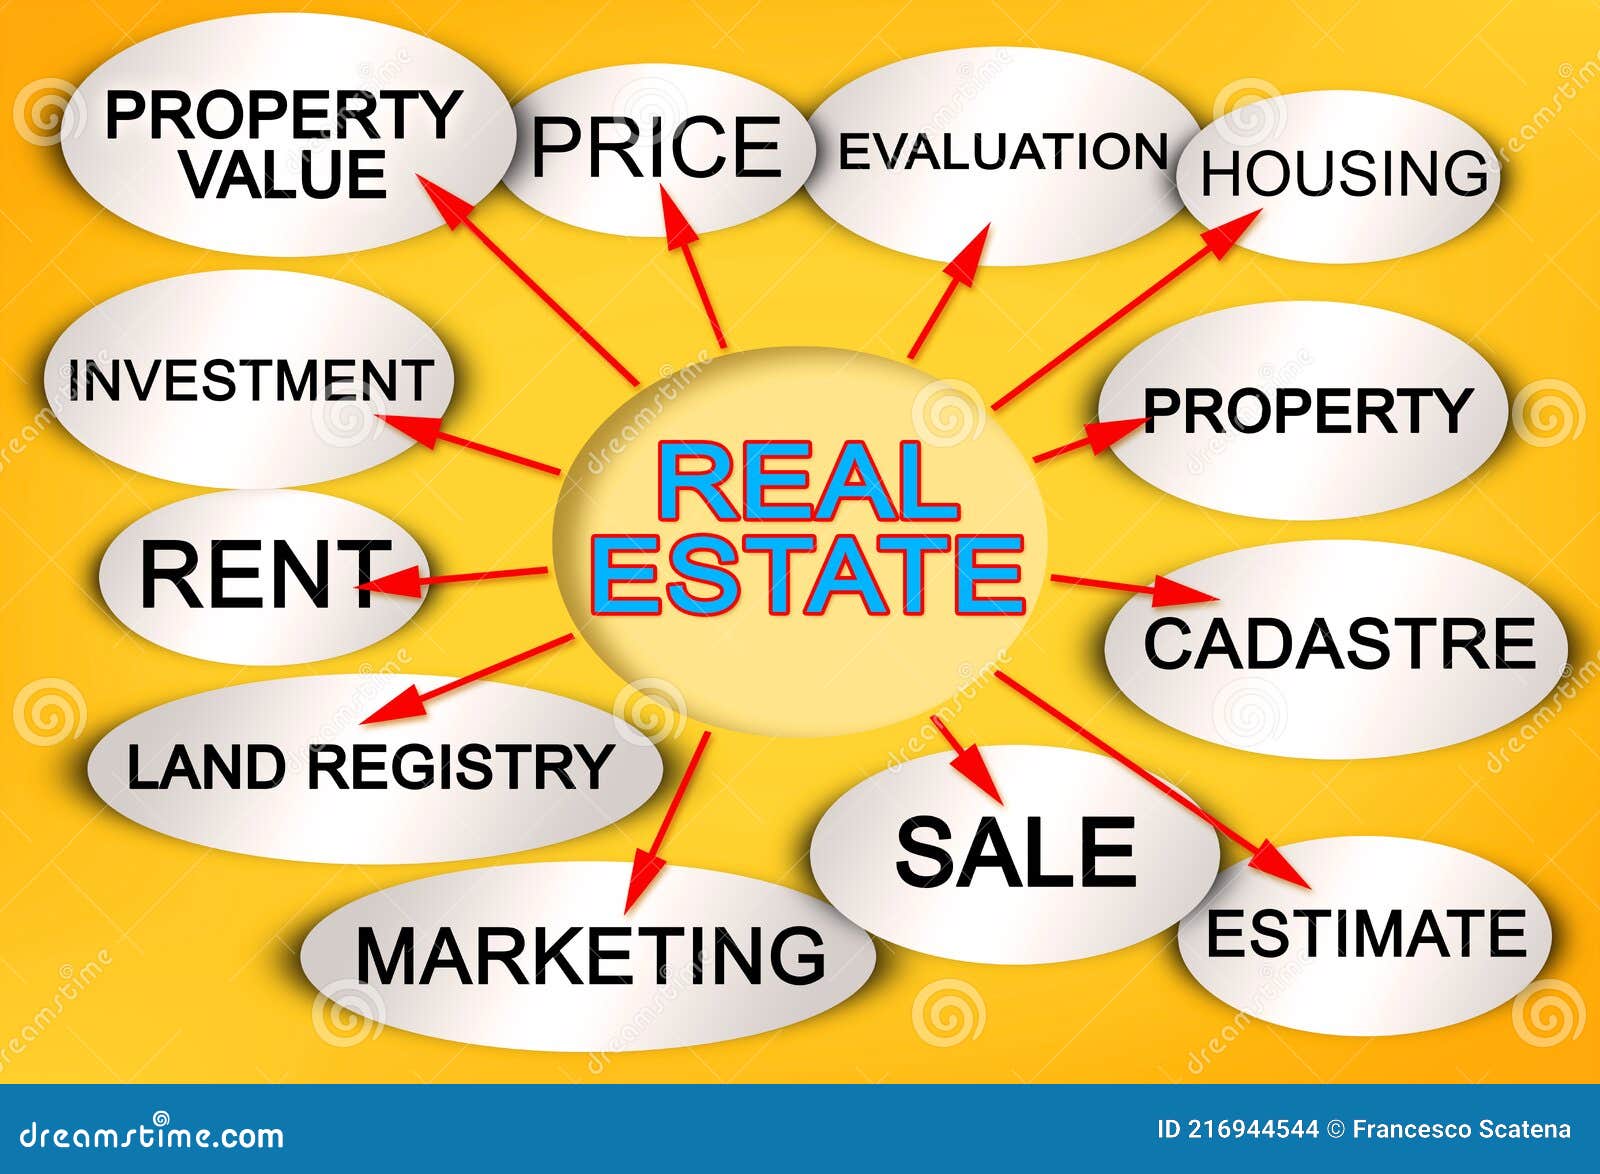 layout about real estate with a descriptive scheme of the main characteristics of property value of buildings and lands